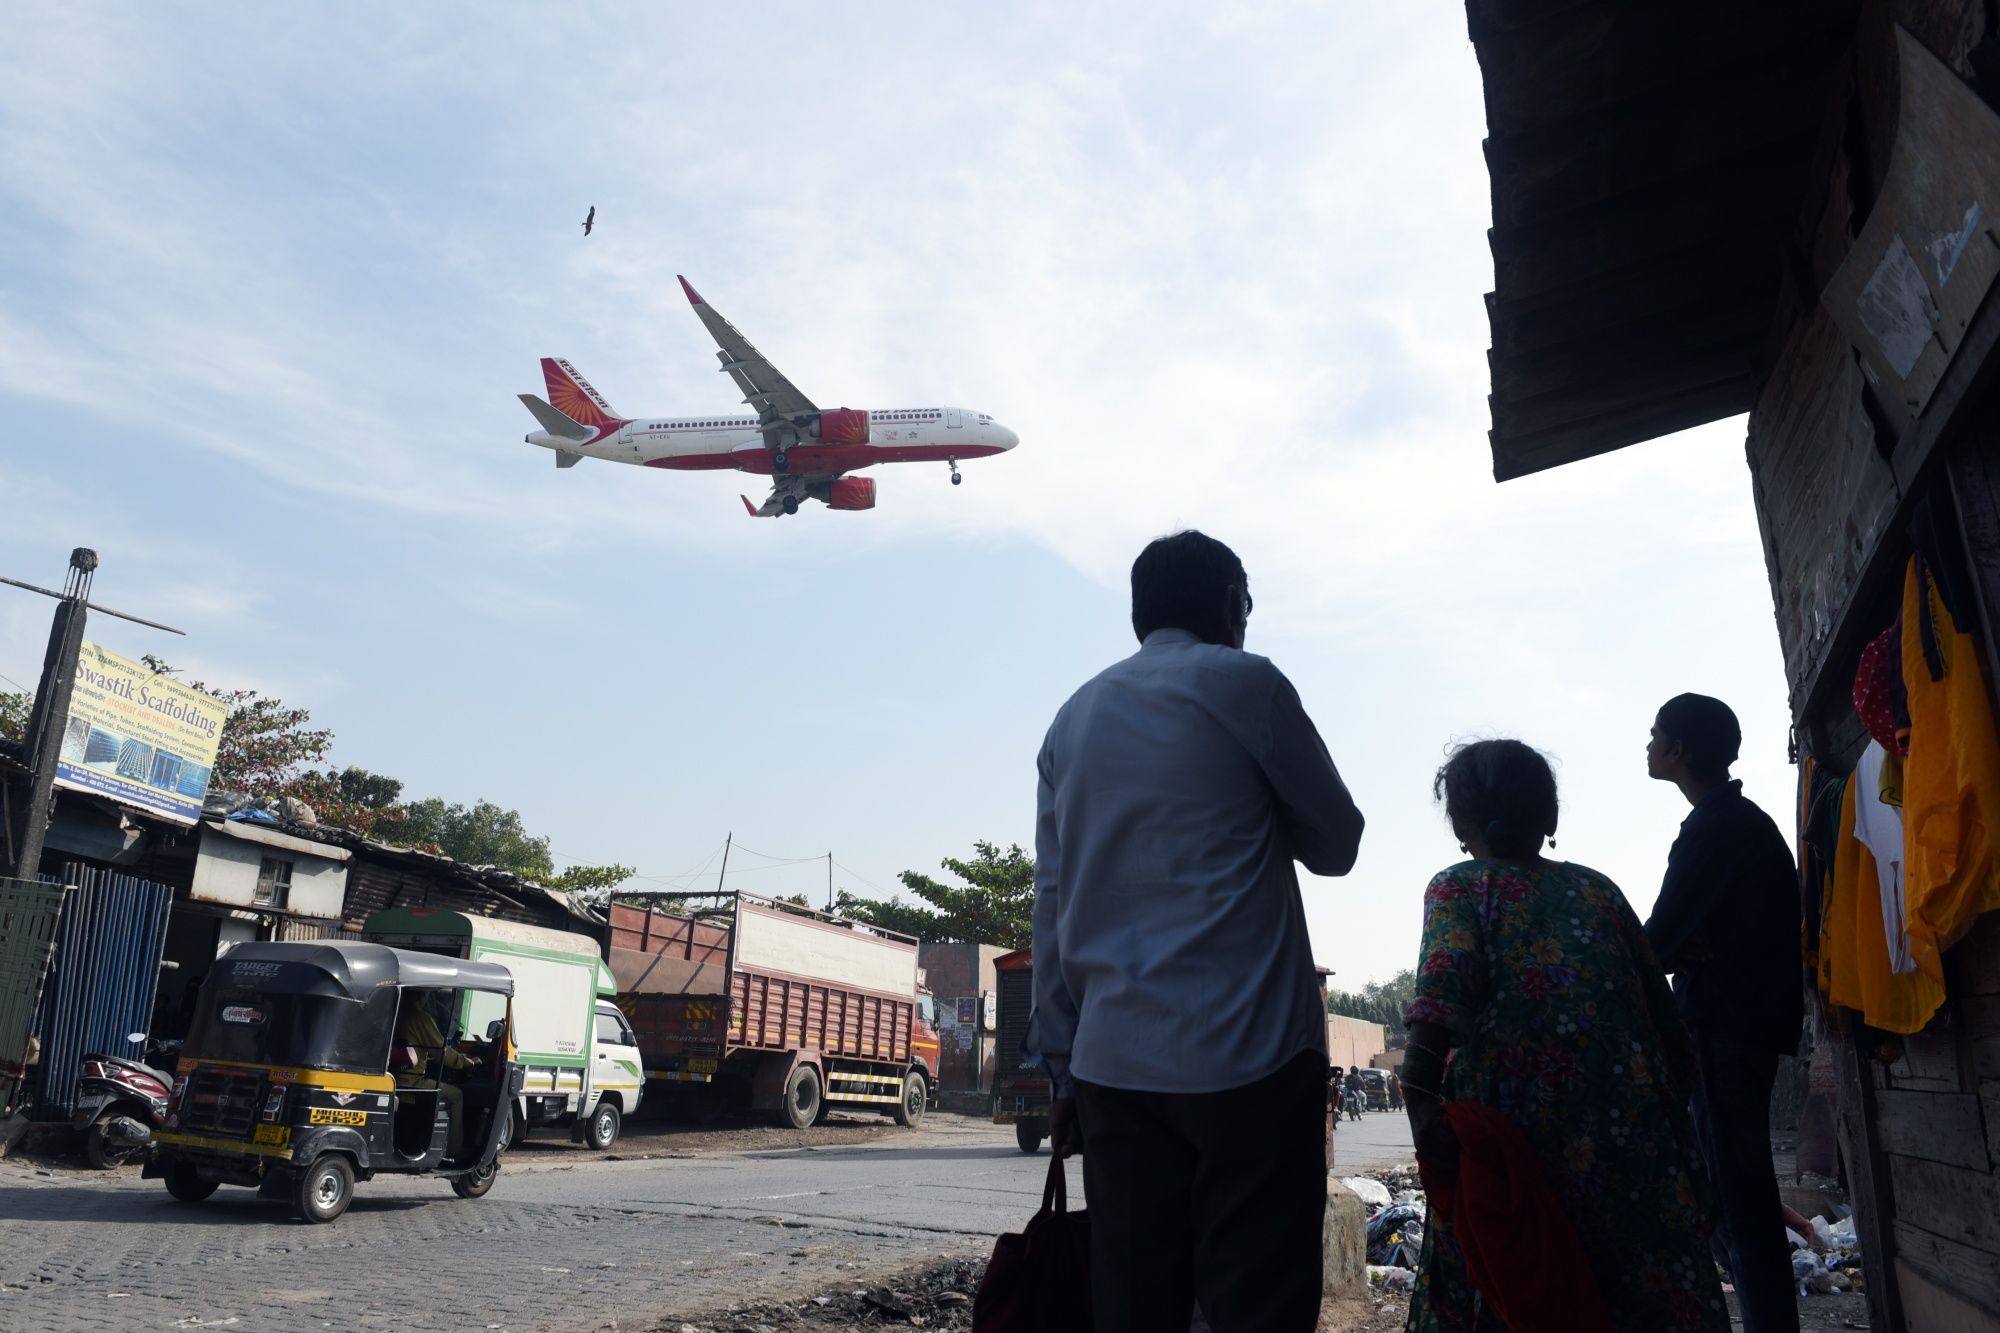 An Air India aircraft flies over Mumbai. some analysts view the recent problems as seasonal or isolated incidents that do not accurately reflect the overall health of the aviation sector. Photo: Bloomberg